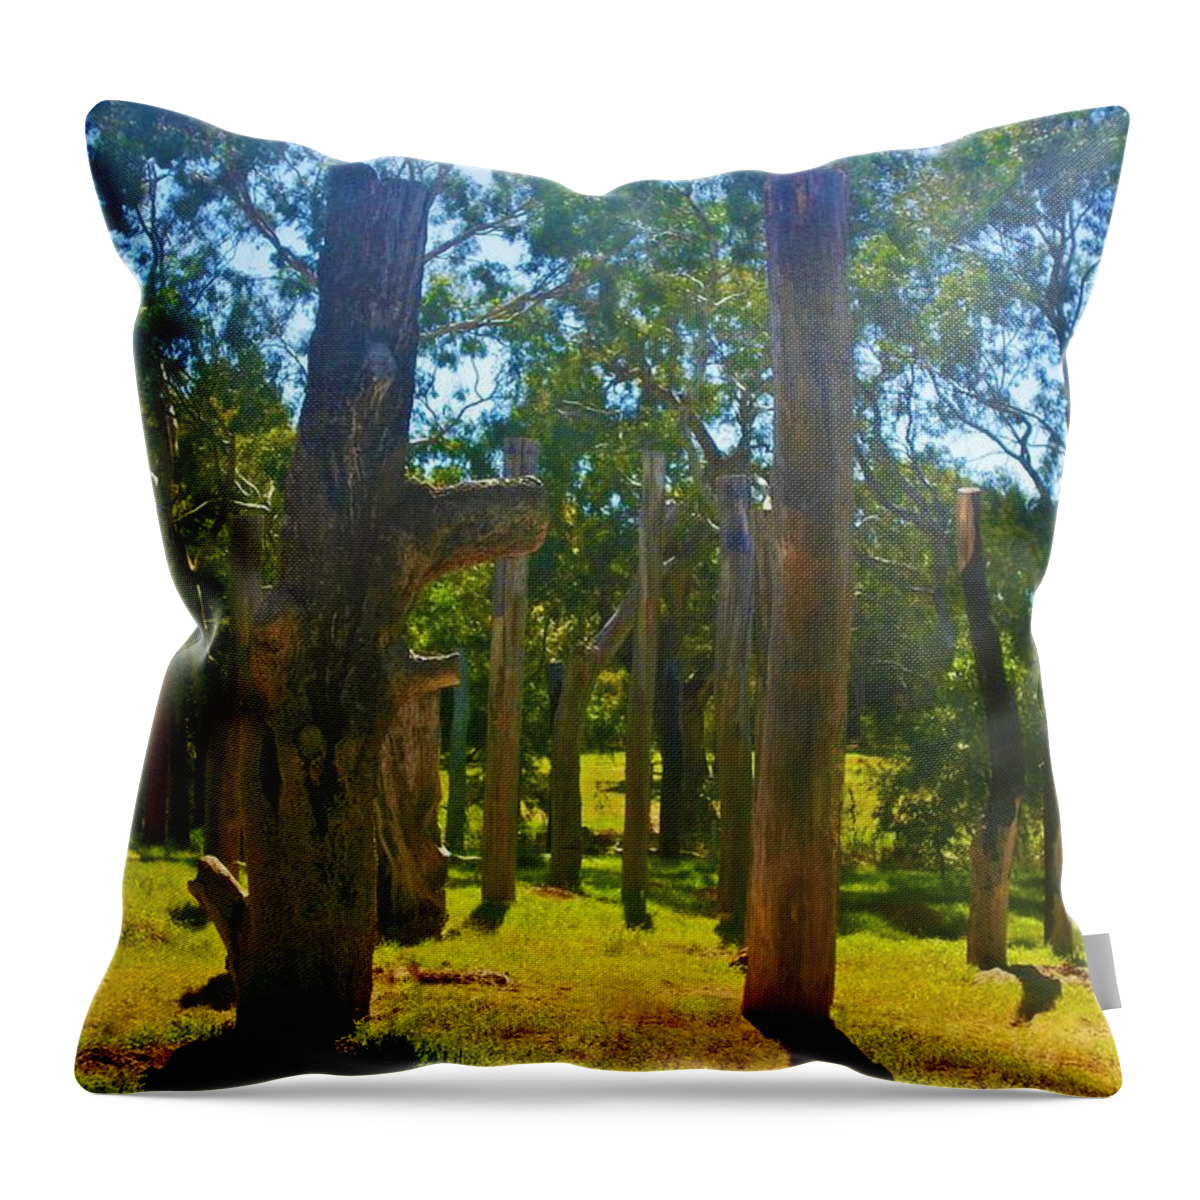 Totem Throw Pillow featuring the photograph Mysterious Totems by Mark Blauhoefer